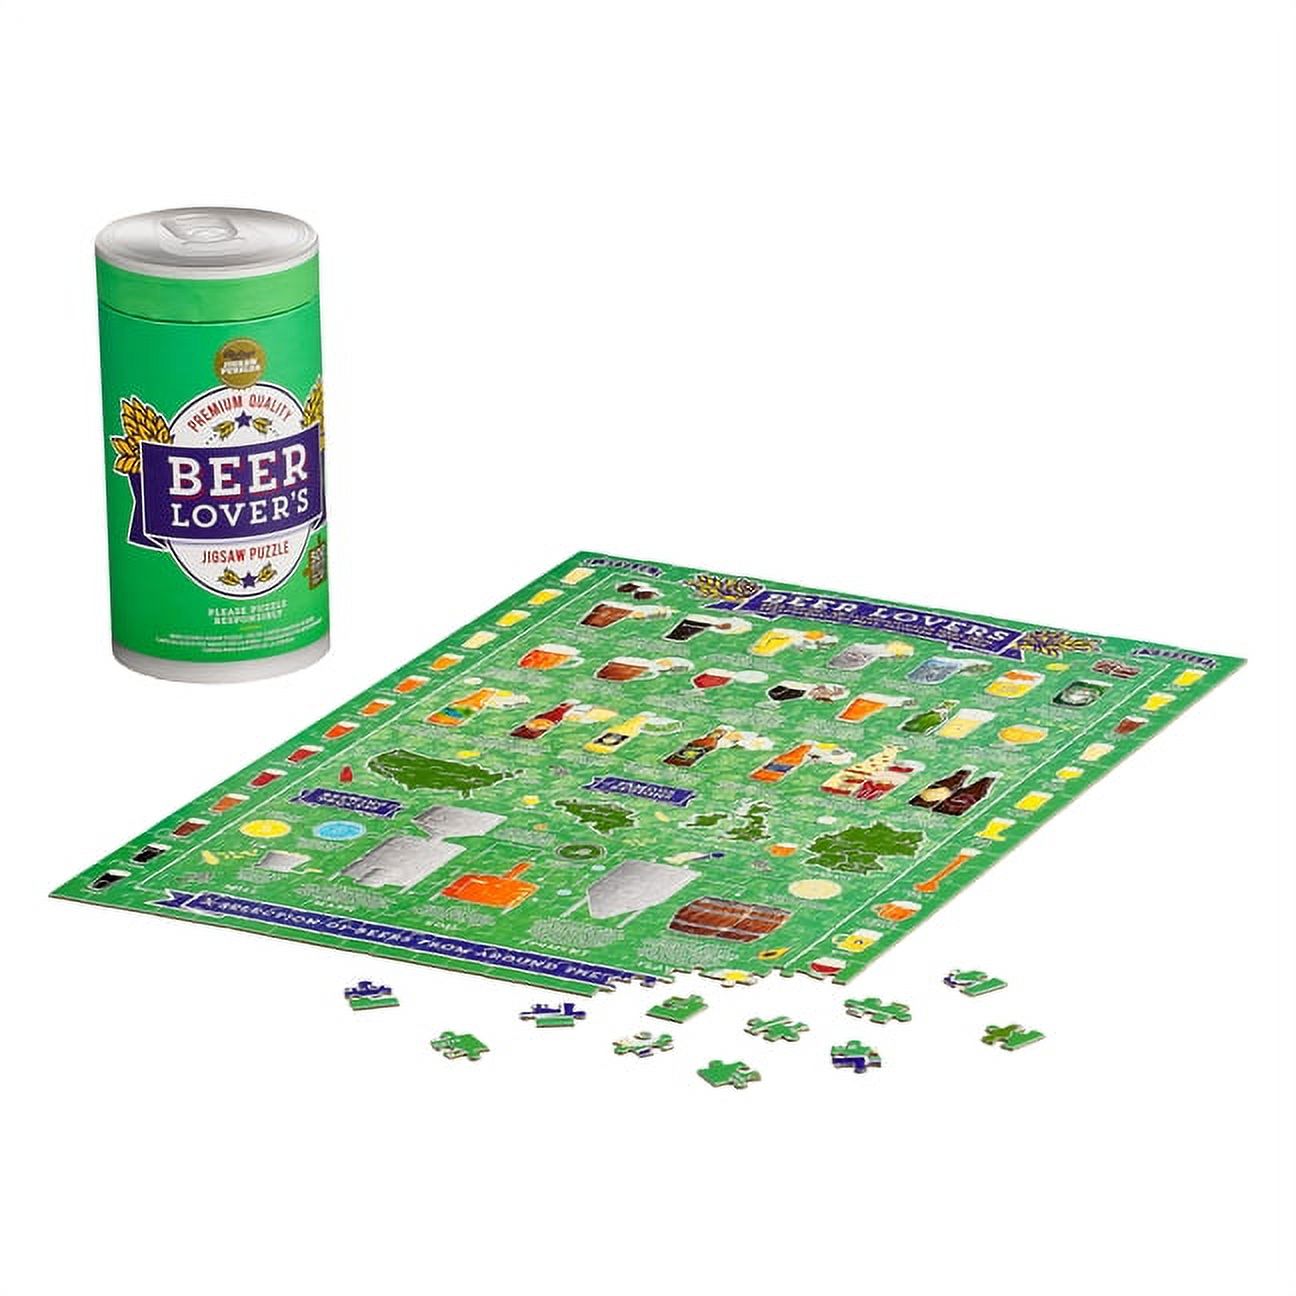 Beer Lover's 500 Piece Jigsaw Puzzle (Other) - image 1 of 3